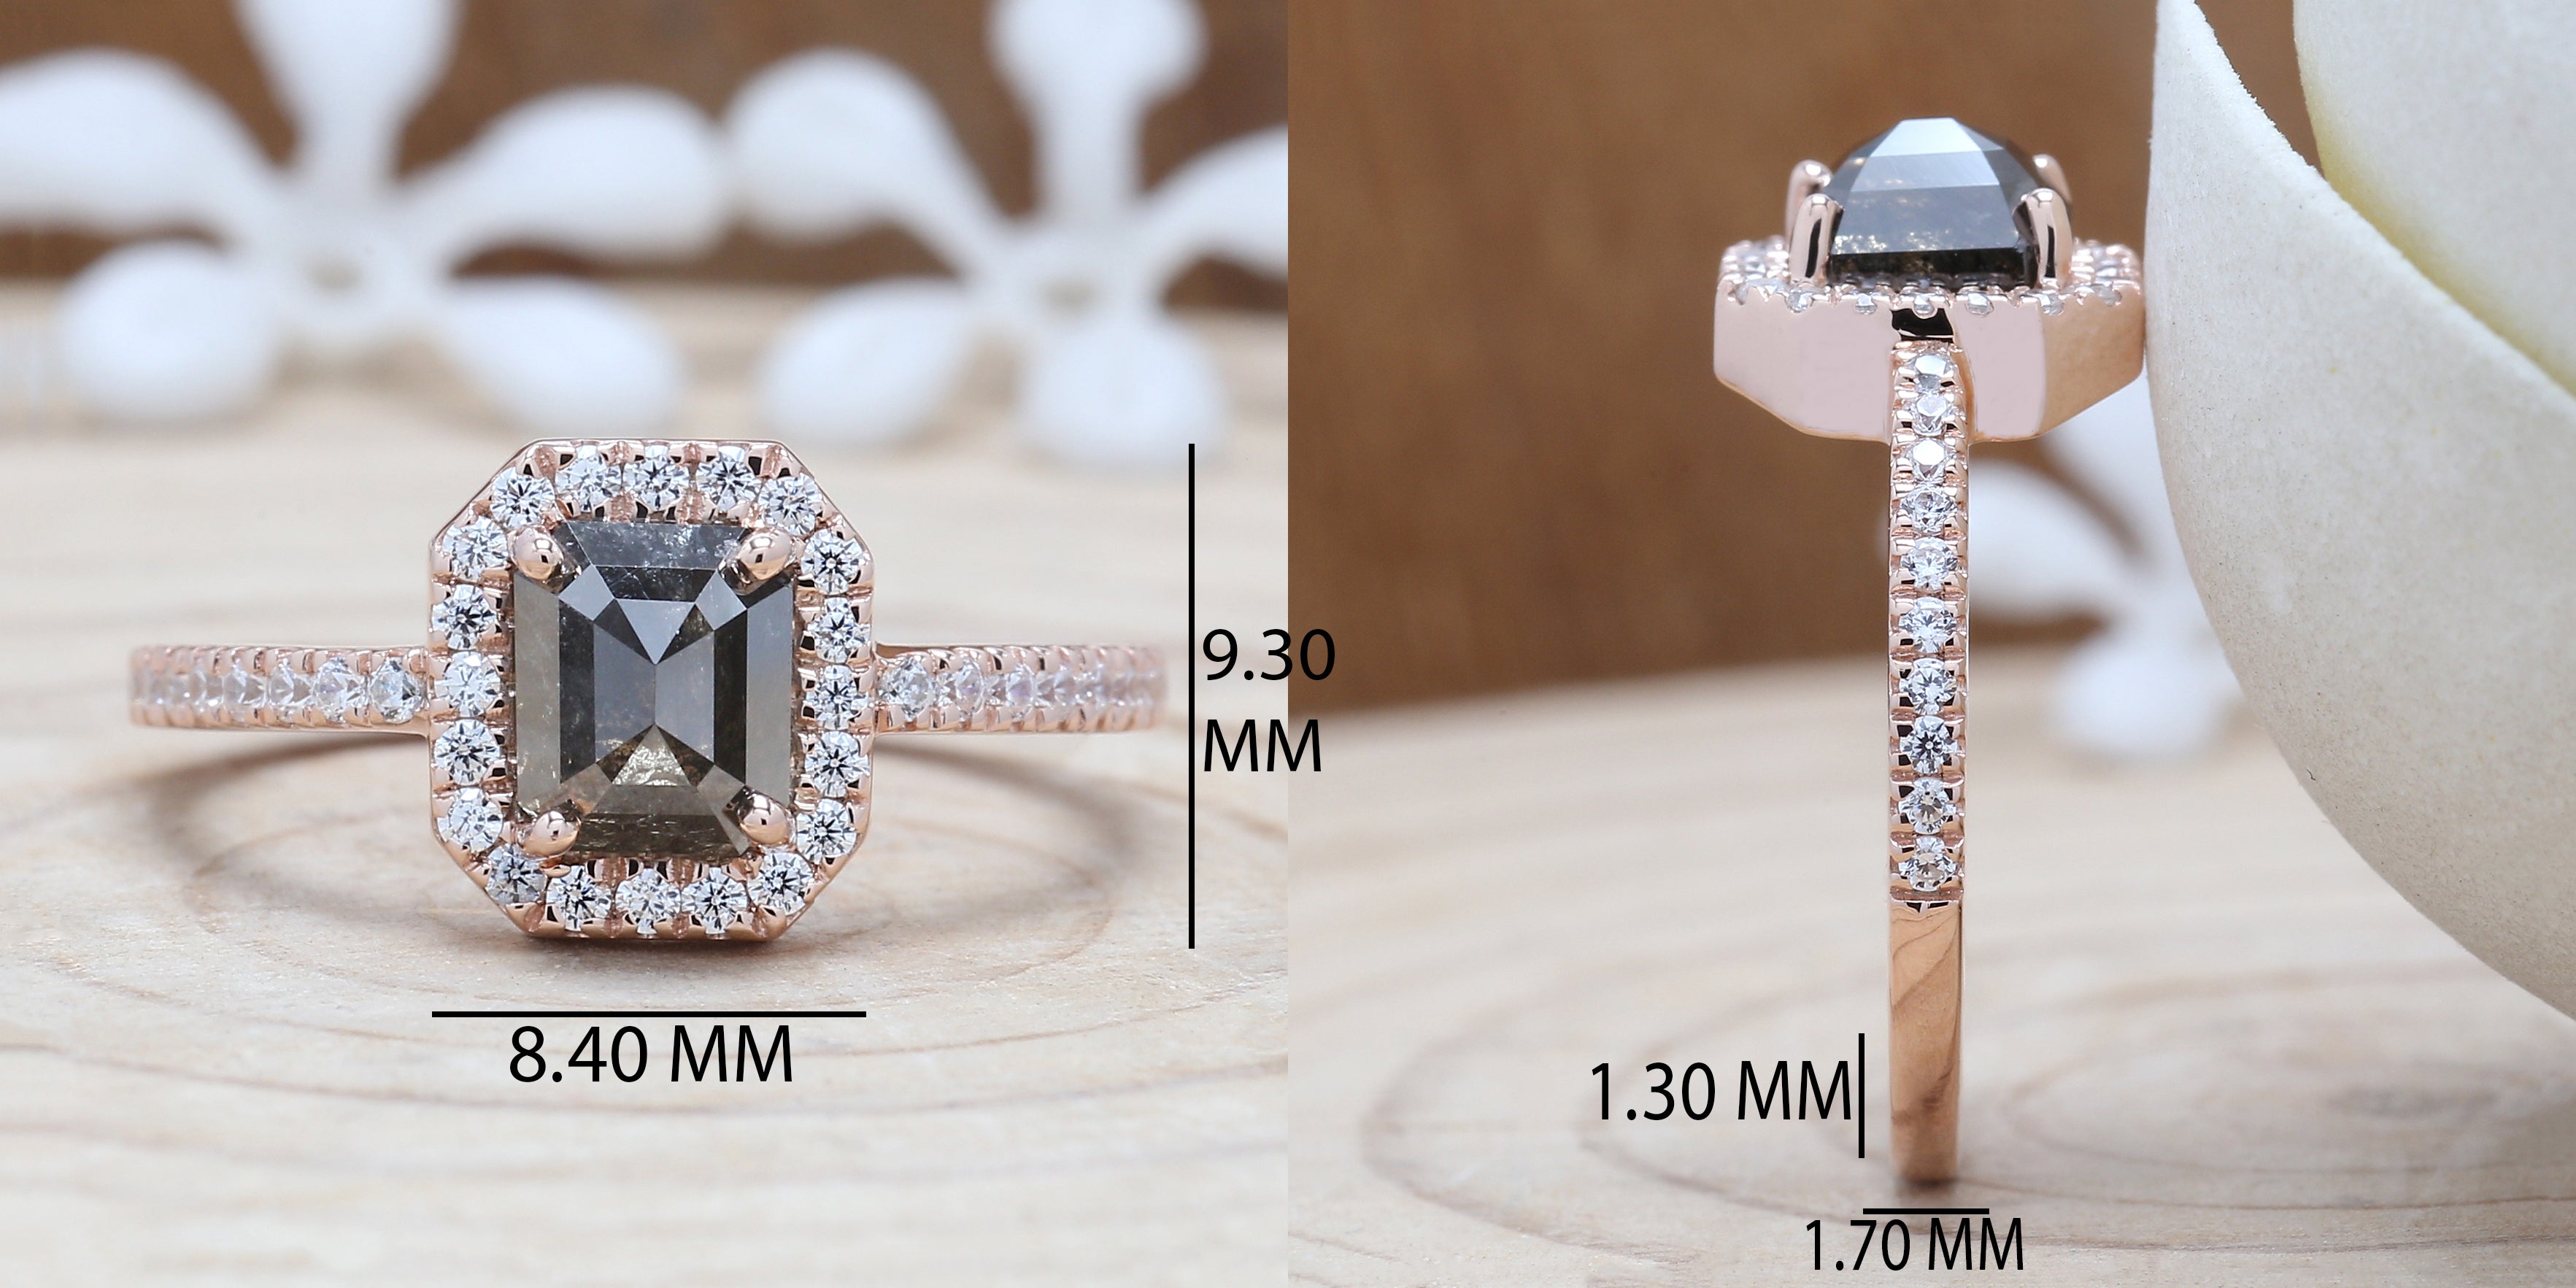 Emerald Cut Salt And Pepper Diamond Ring 1.26 Ct 6.10 MM Emerald Diamond Ring 14K Solid Rose Gold Silver Engagement Ring Gift For Her QK1954